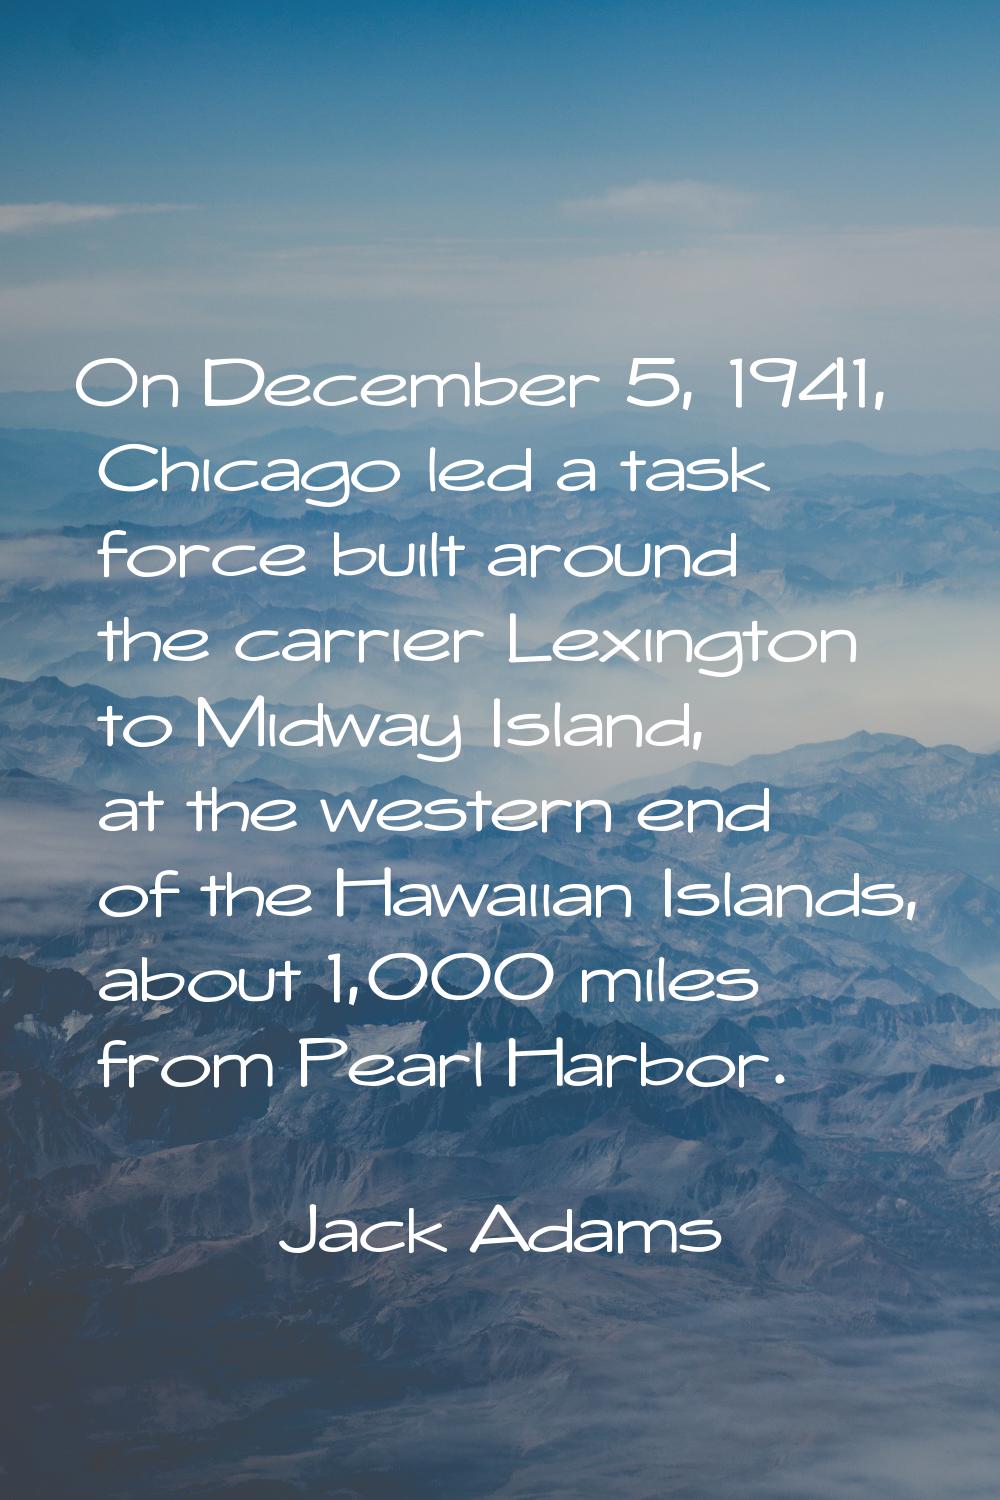 On December 5, 1941, Chicago led a task force built around the carrier Lexington to Midway Island, 